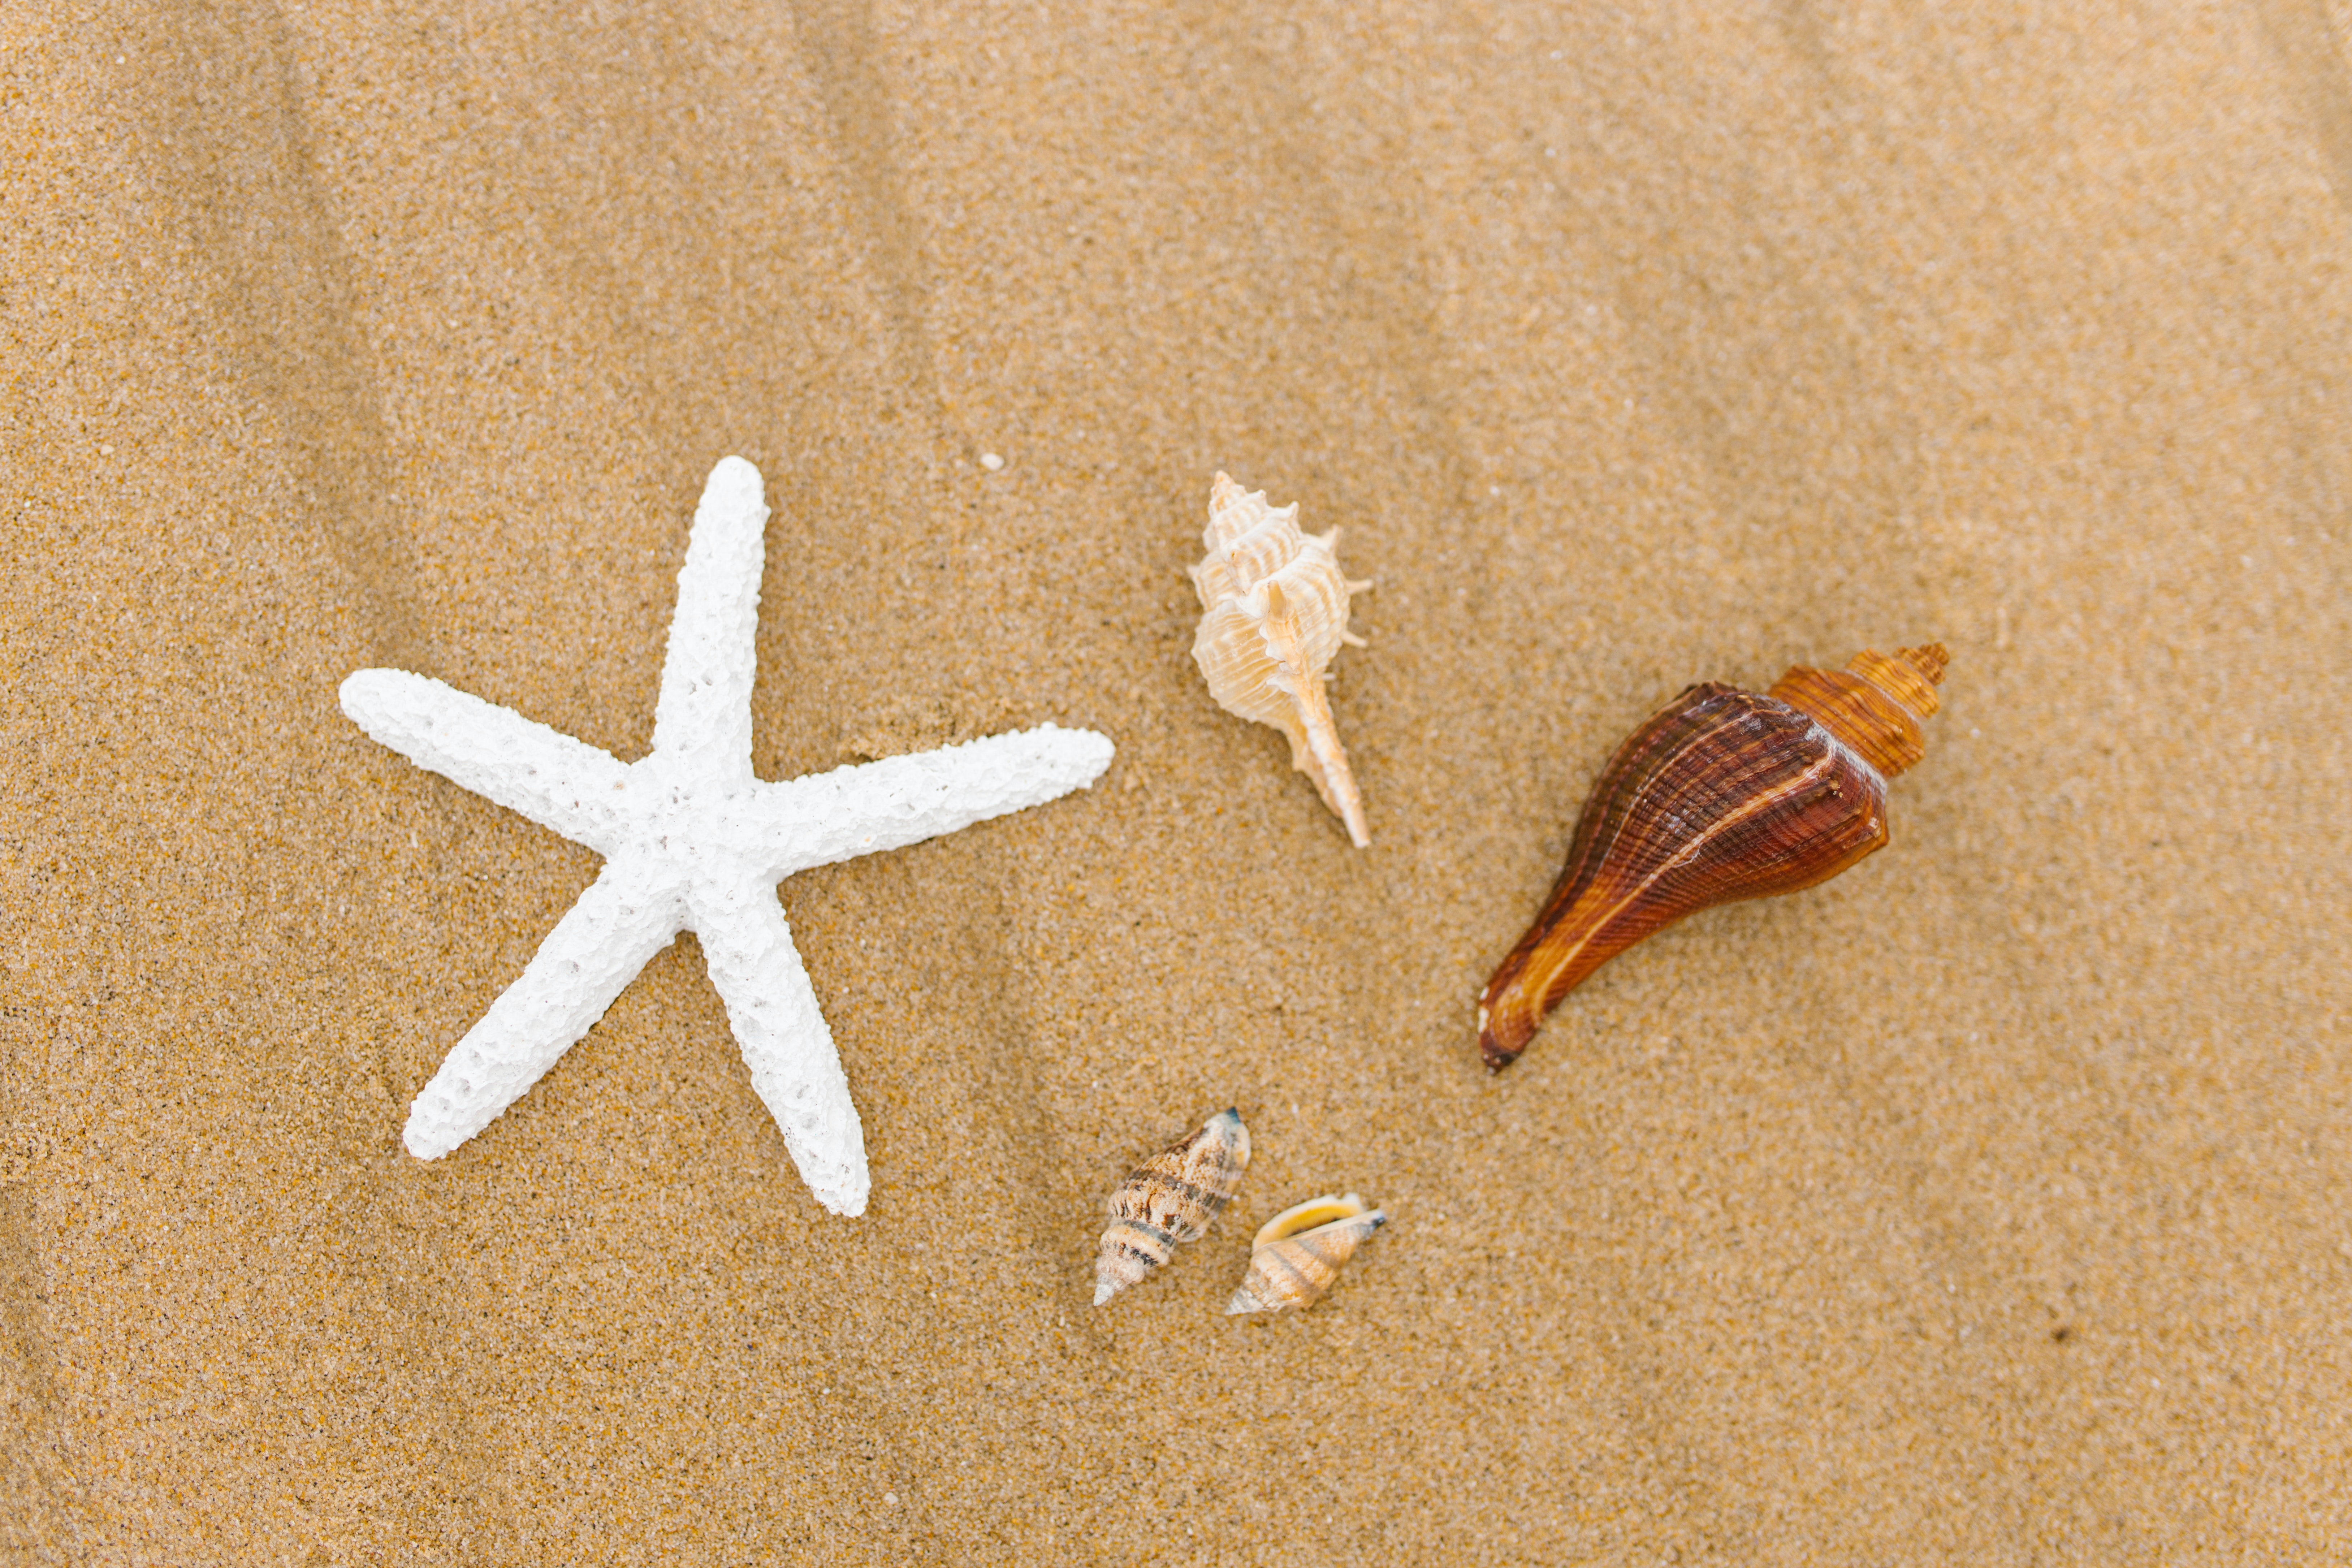 Shell And Starfish In Sand Wallpapers